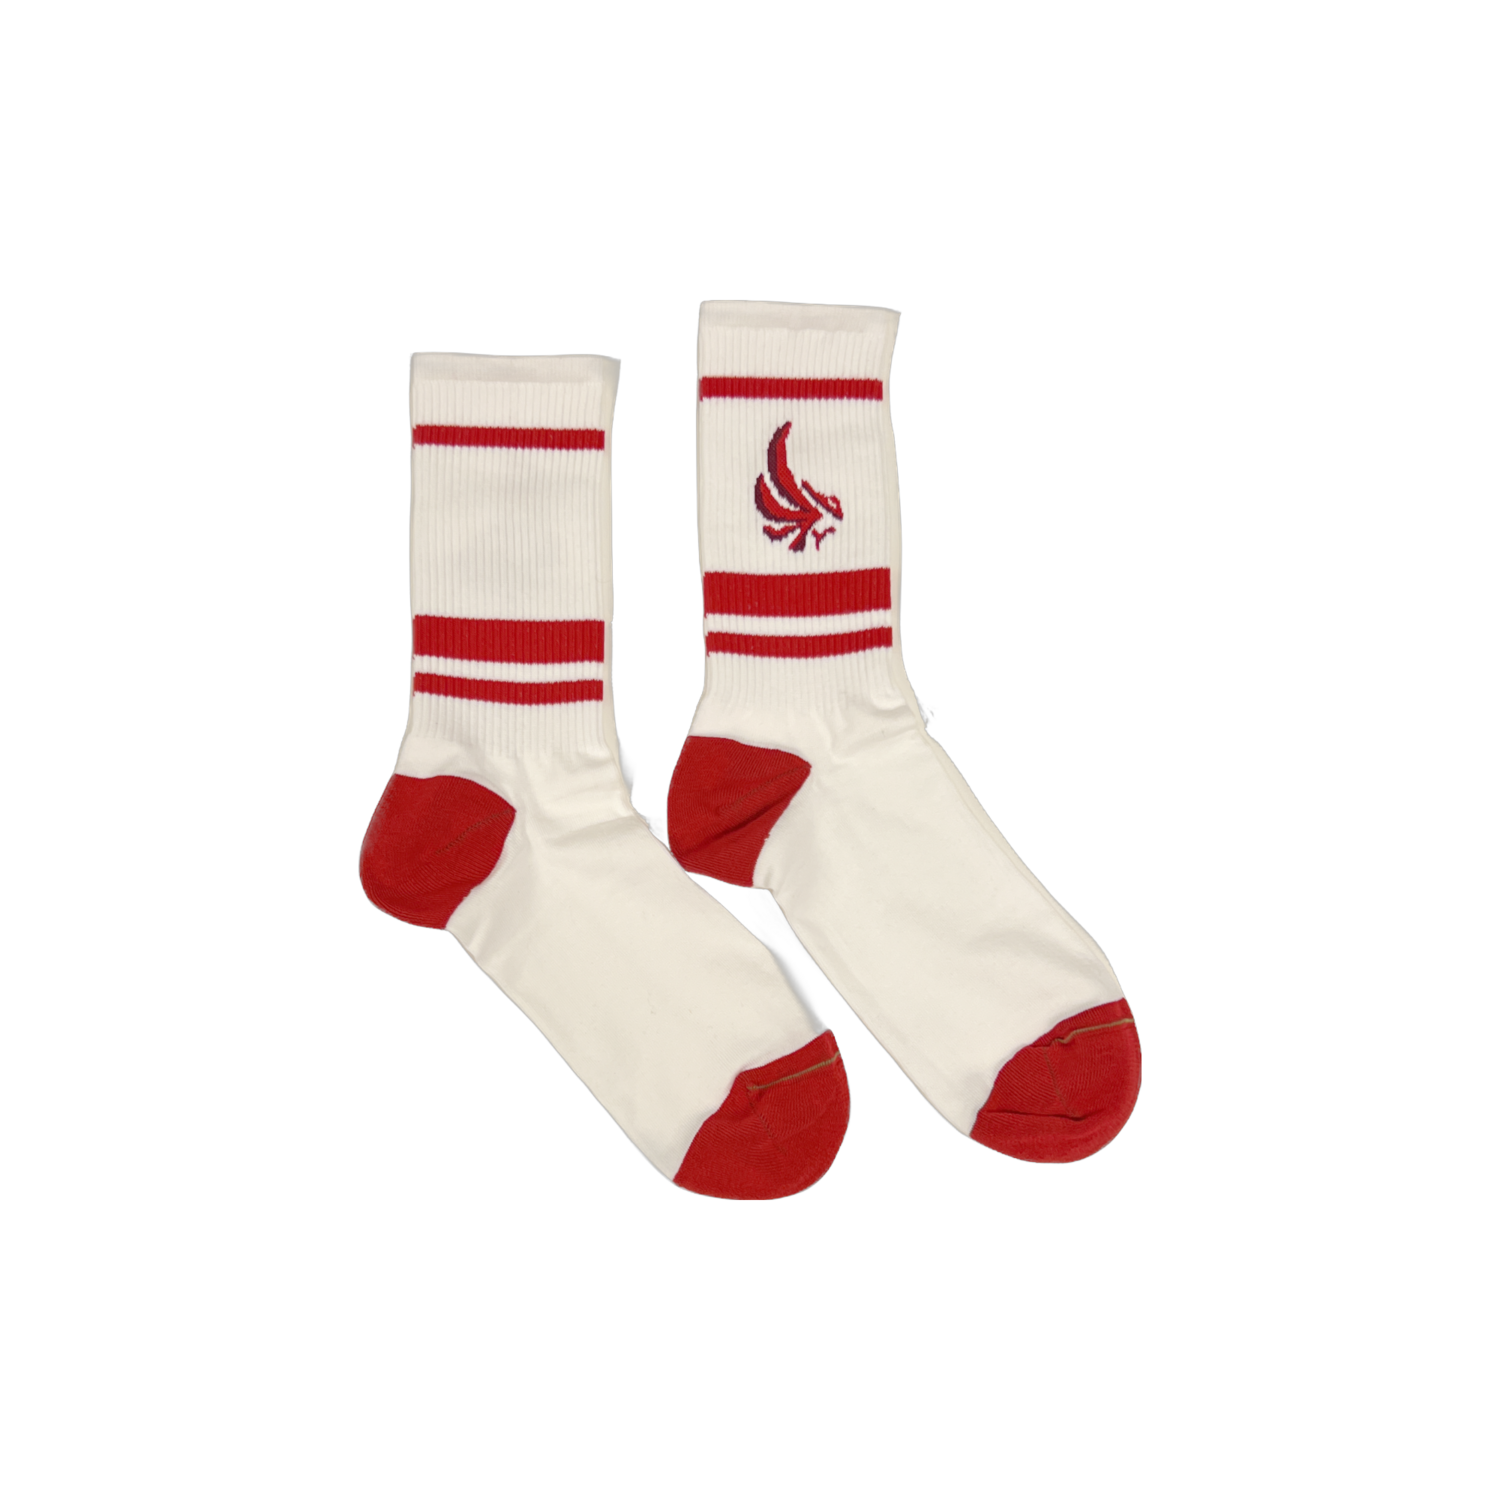 RED ICON - WHITE SOCKS, SIZE: YOUTH